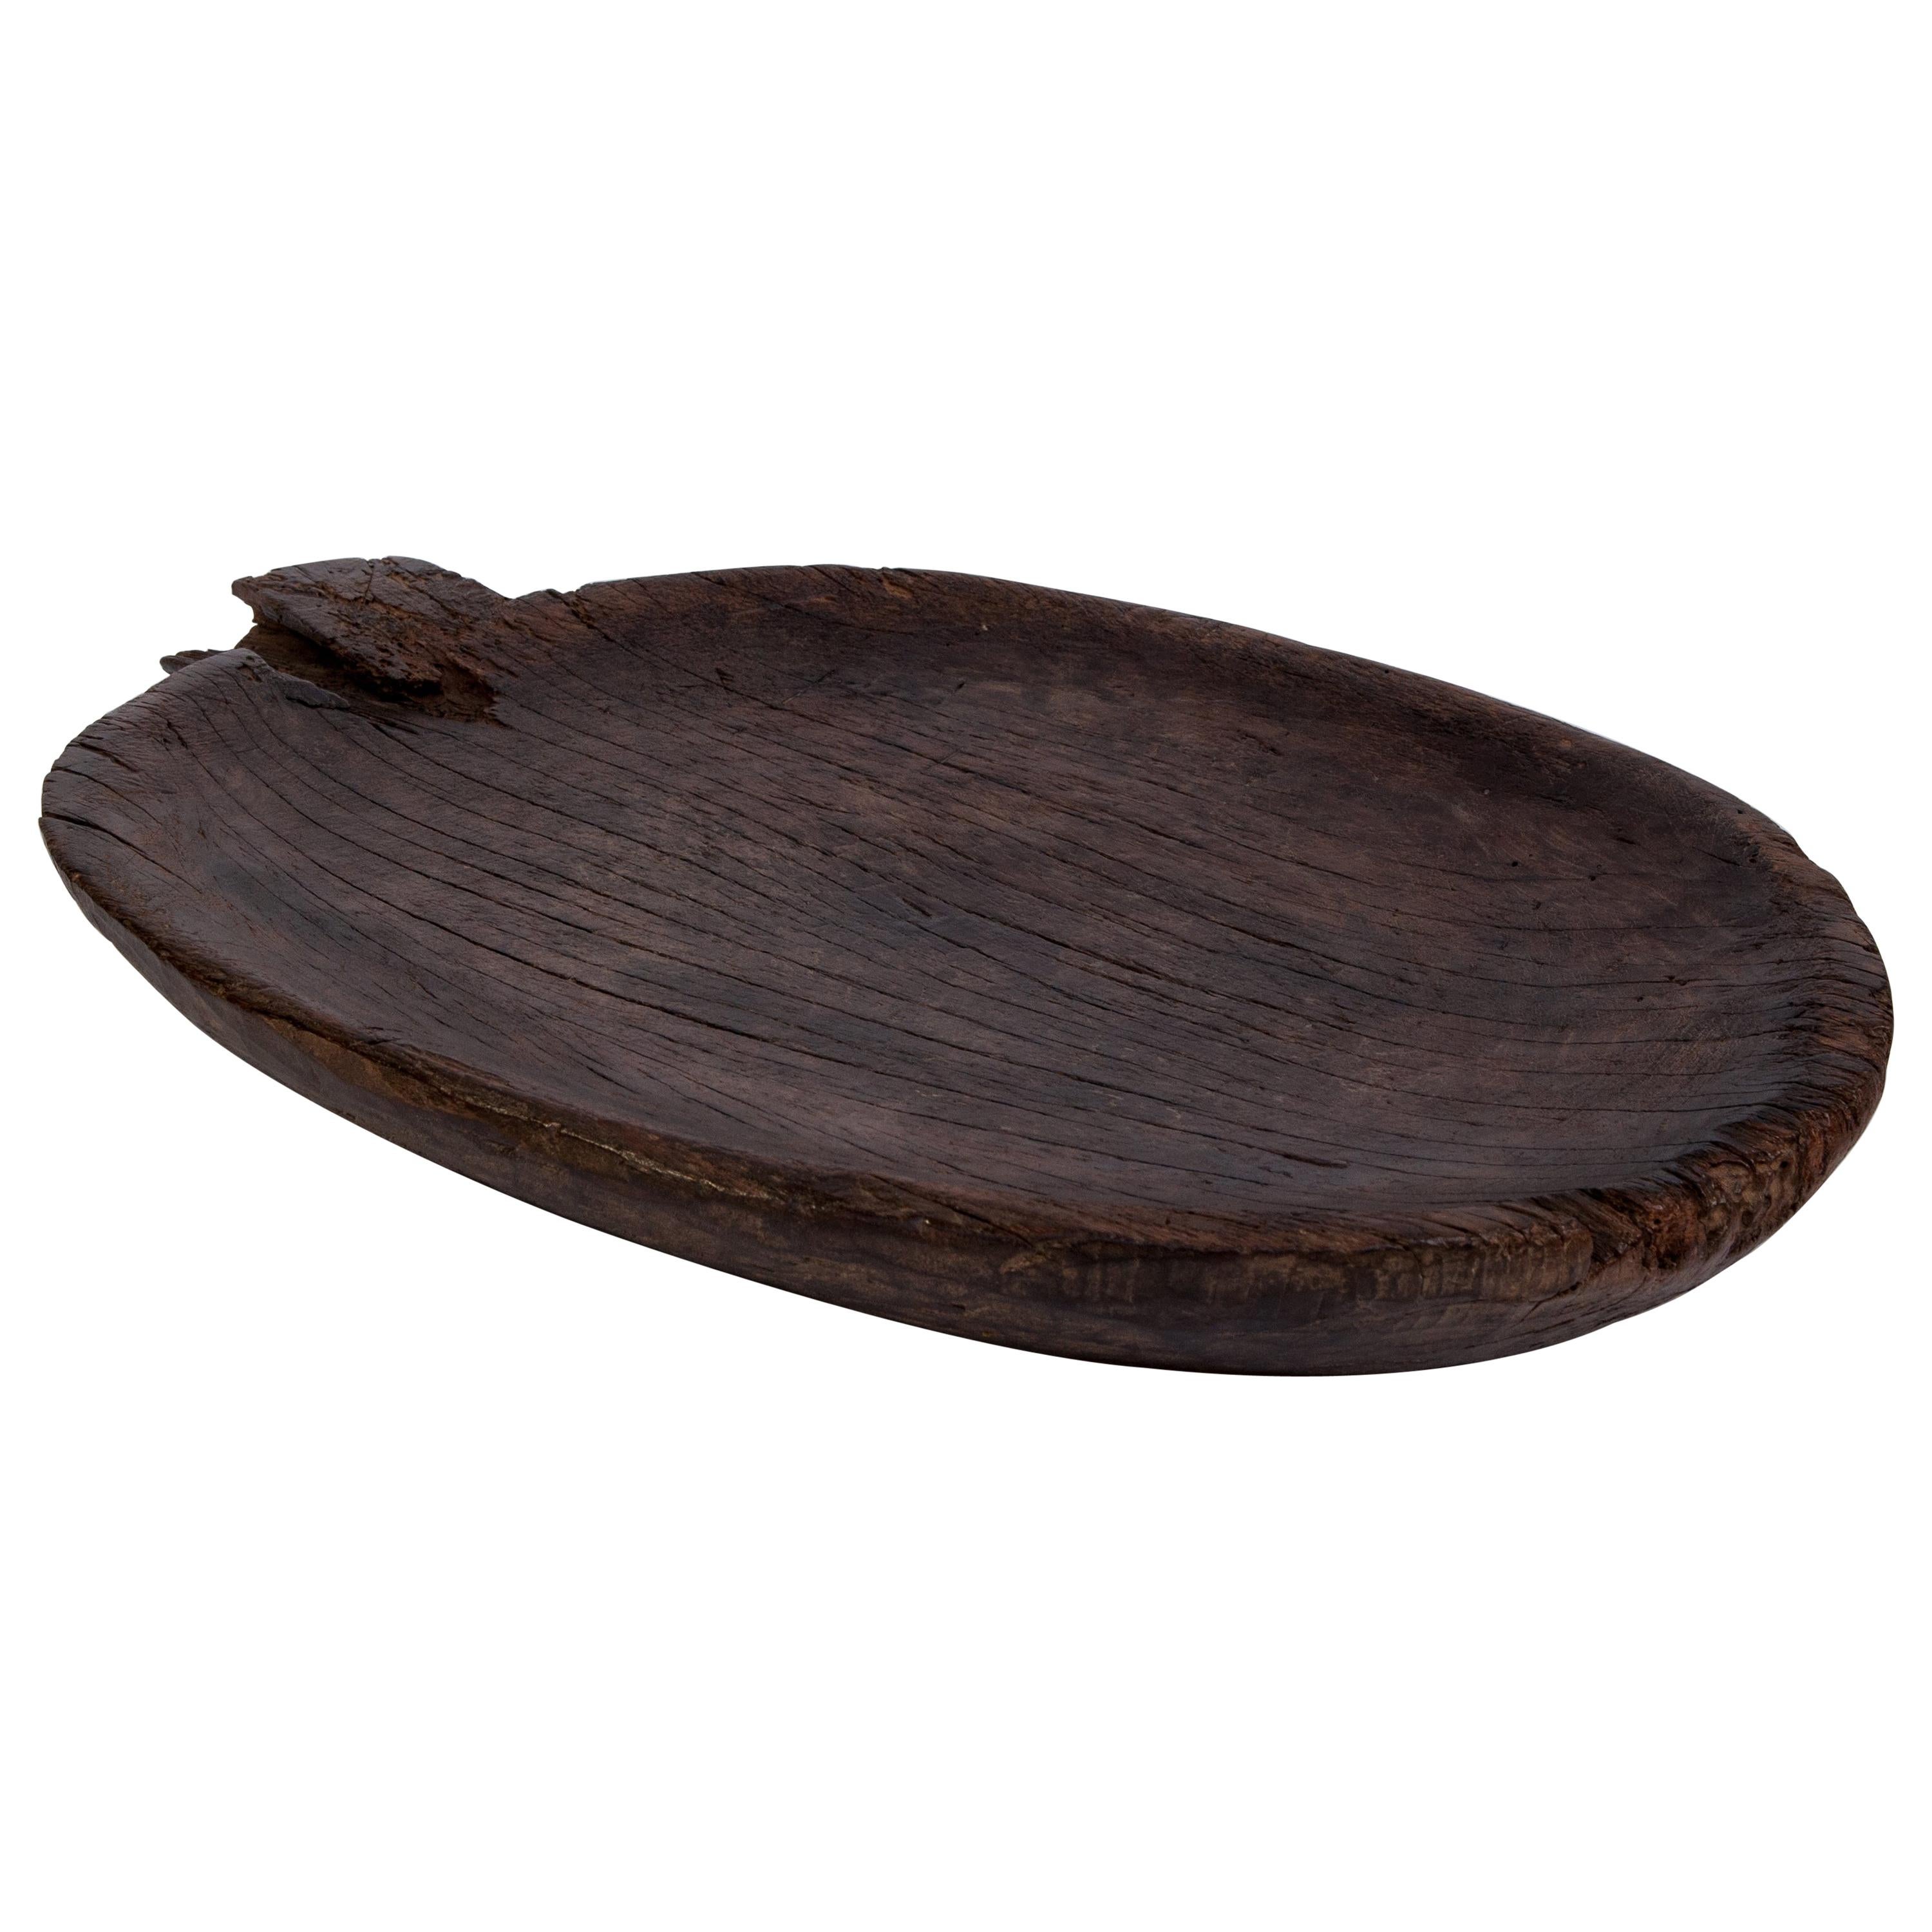 Vintage Tribal Flat Wooden Tray Large, from Nagaland, Early to Mid-20th Century.